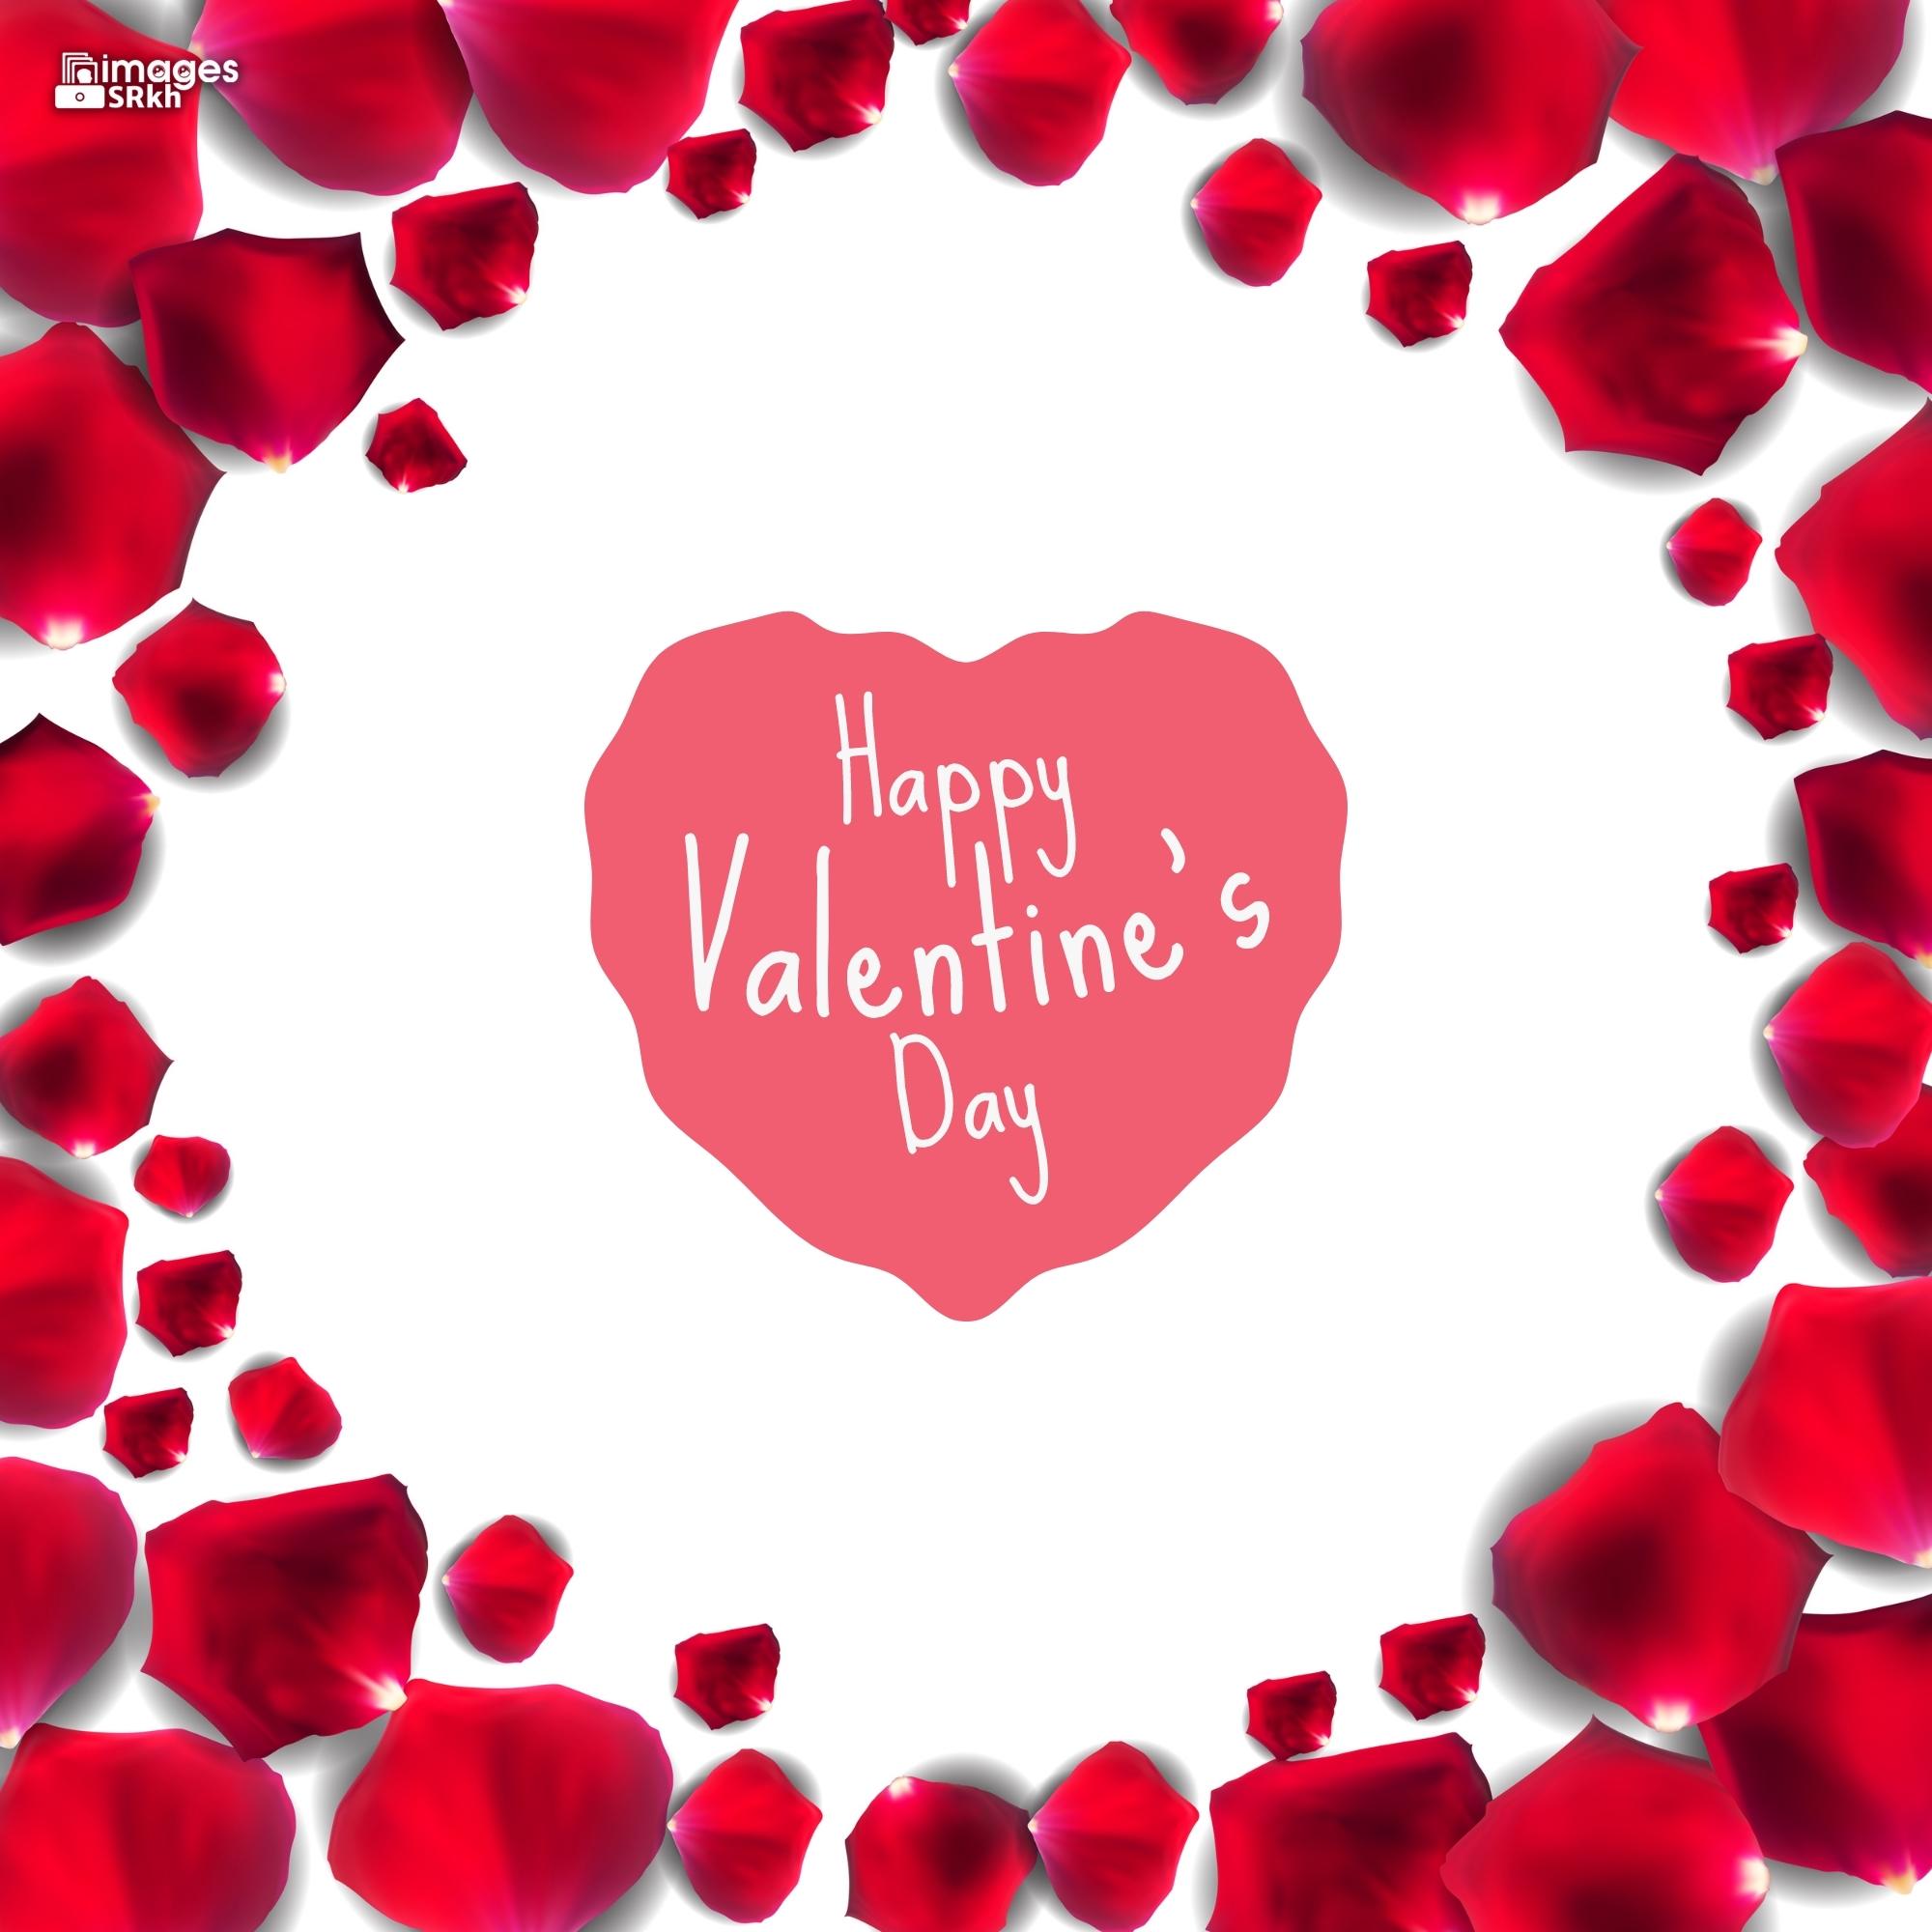 Happy Valentines Day | 467 | PREMIUM IMAGES | Wishes for Love